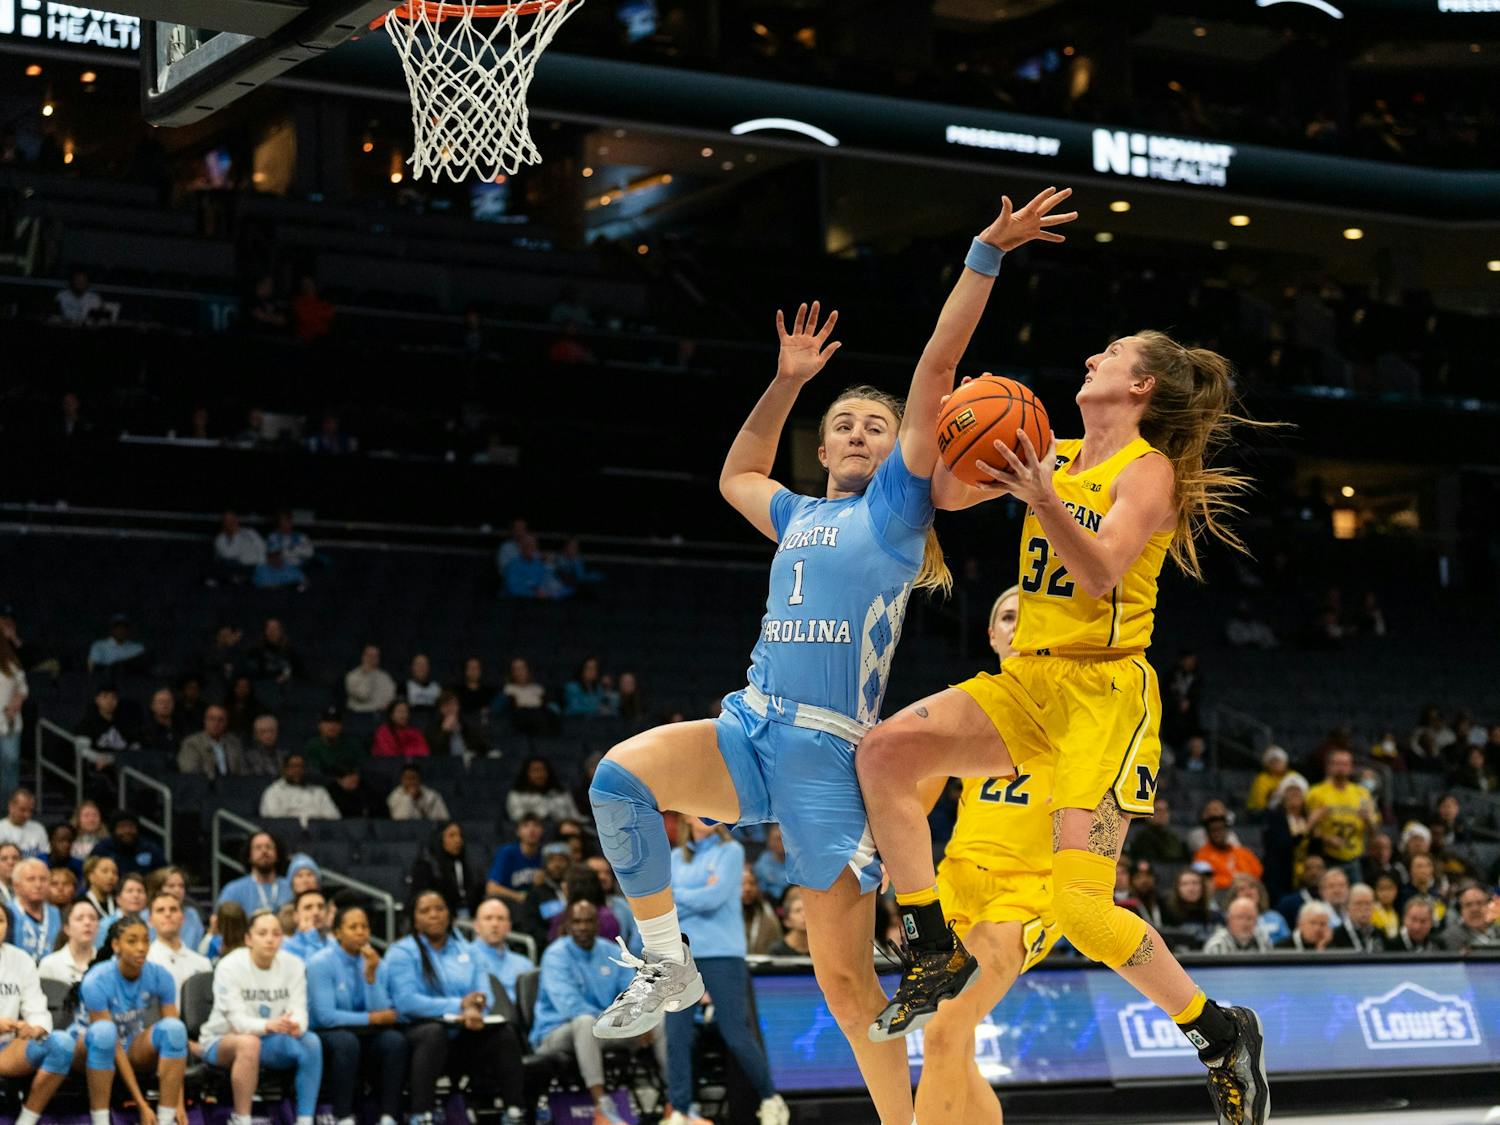 UNC junior guard Alyssa Ustby (1) attempts to block Michigan fifth-year guard Leigha Brown (32) during the women’s basketball game against Michigan at the Jumpman Invitational on Tuesday, Dec. 20, 2022, at the Spectrum Center. UNC fell to Michigan 76-68.